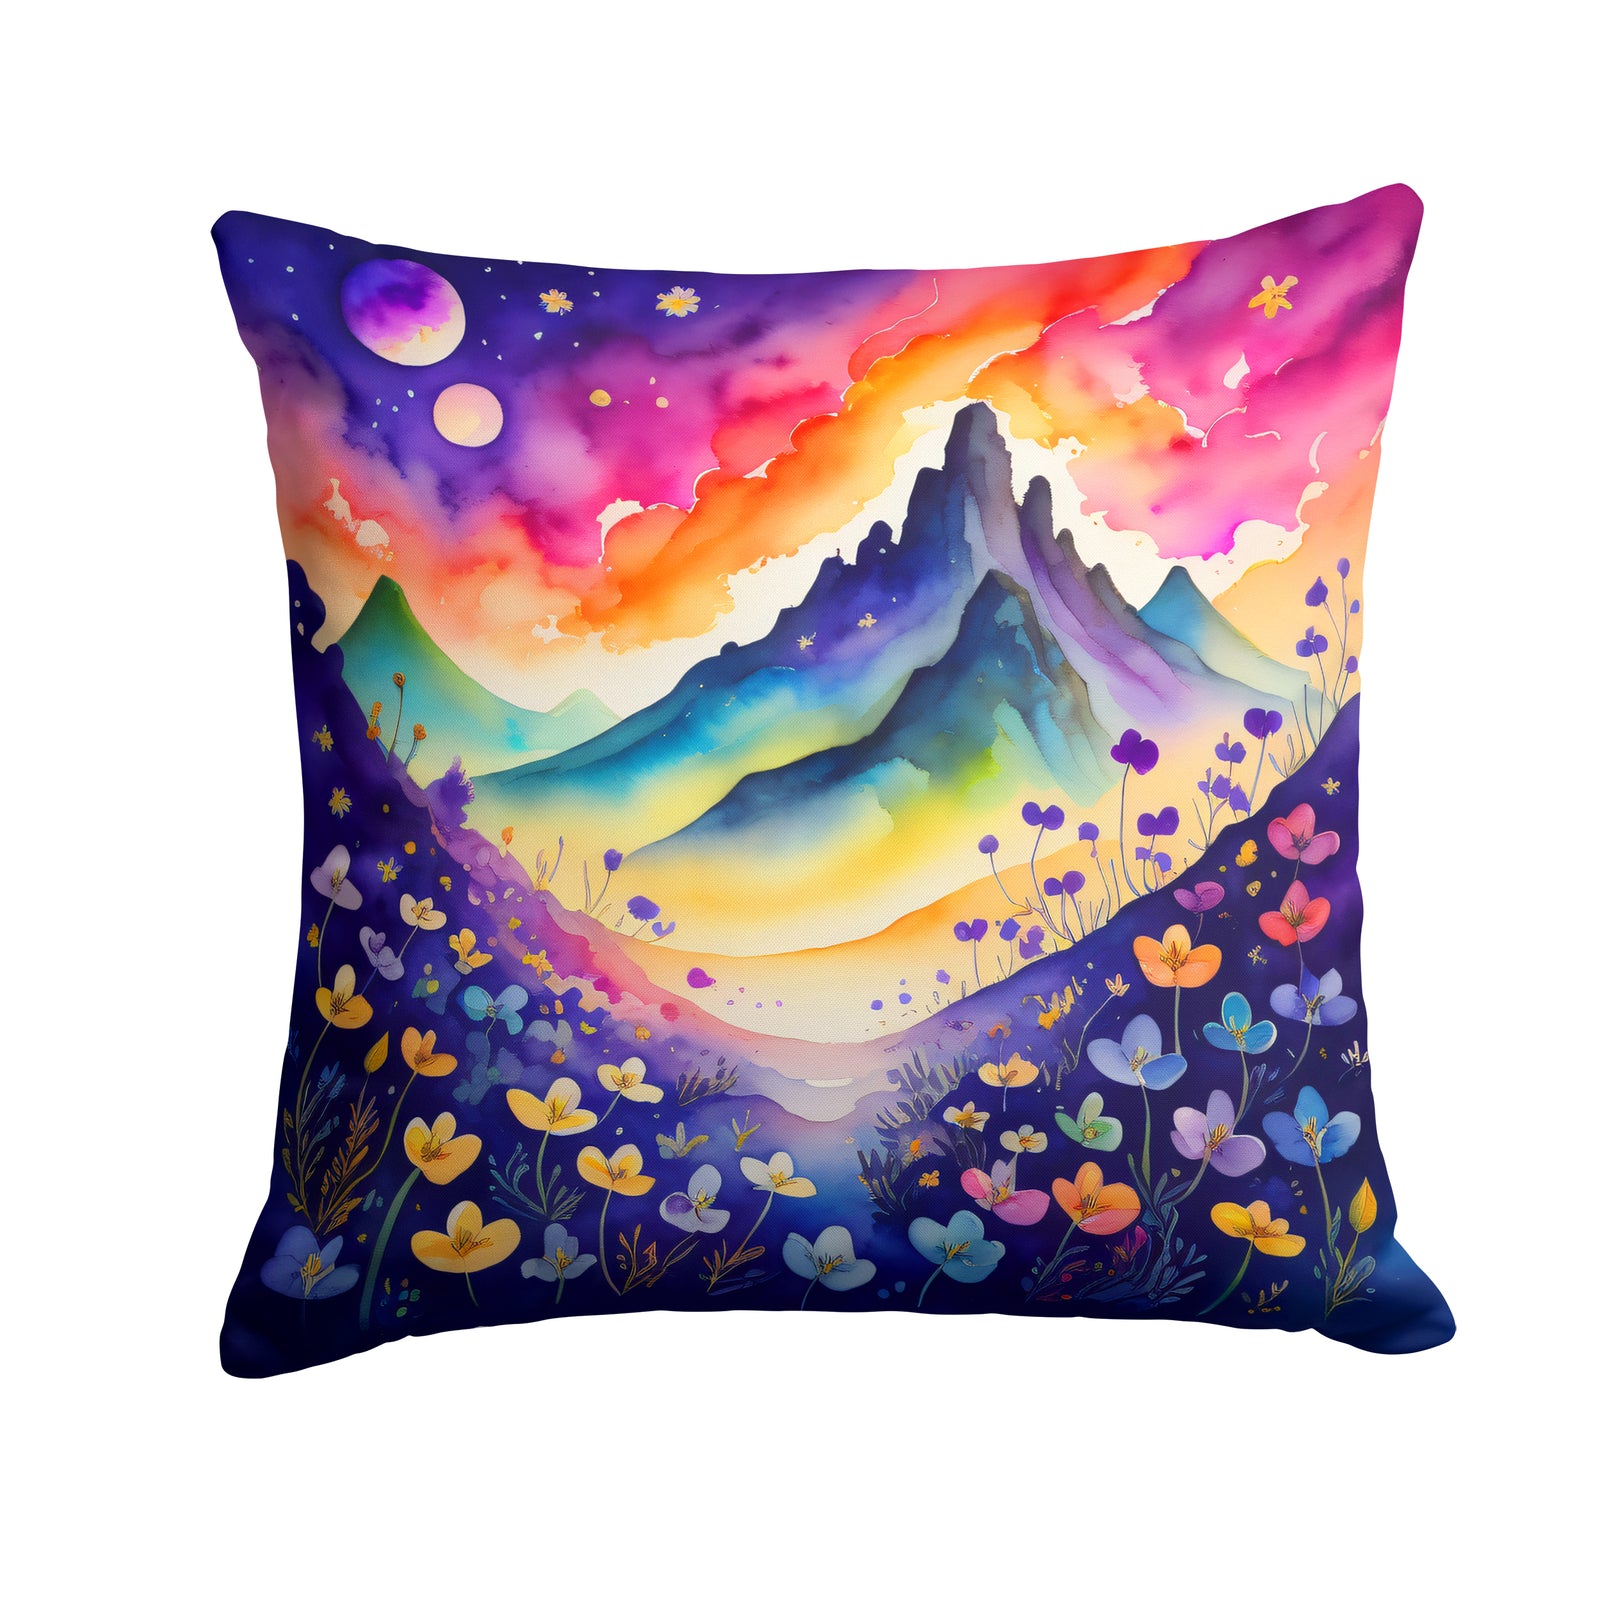 Buy this Colorful Violets Fabric Decorative Pillow